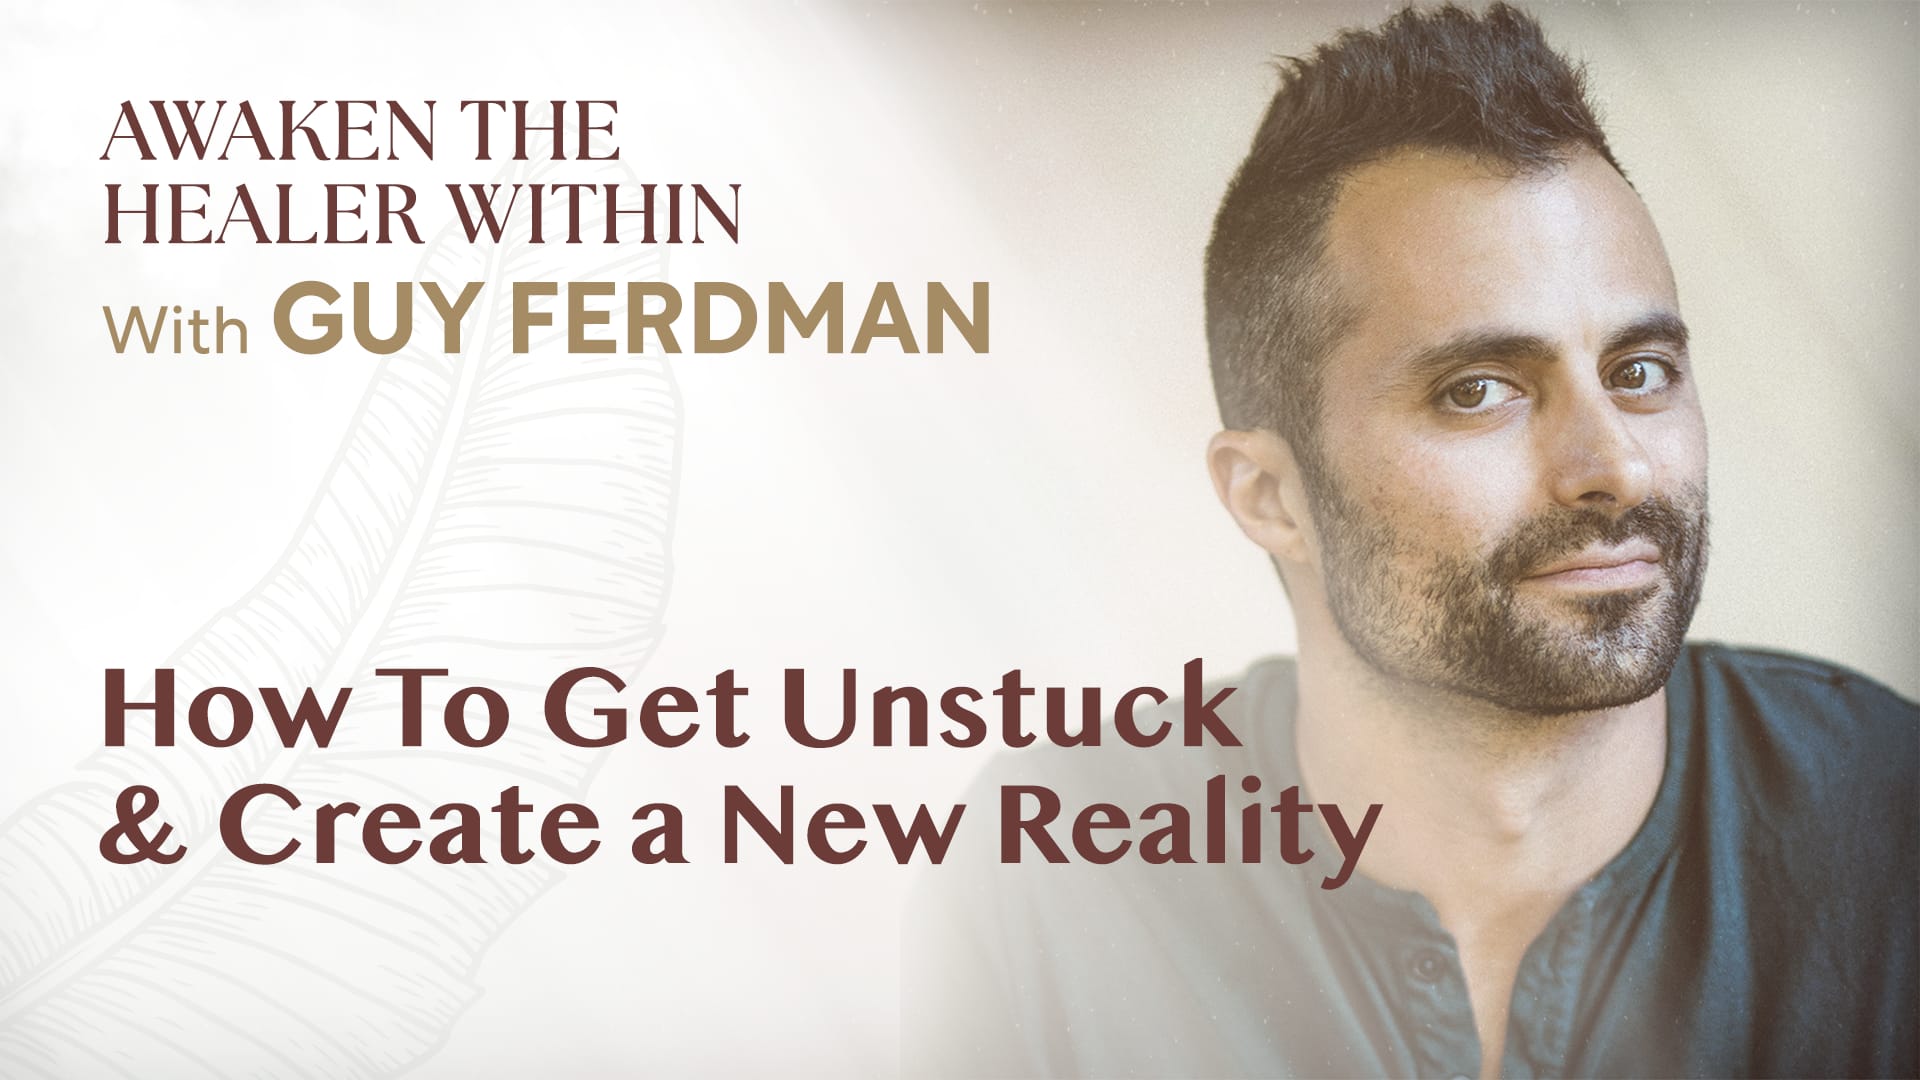 How To Get Unstuck & Create a New Reality